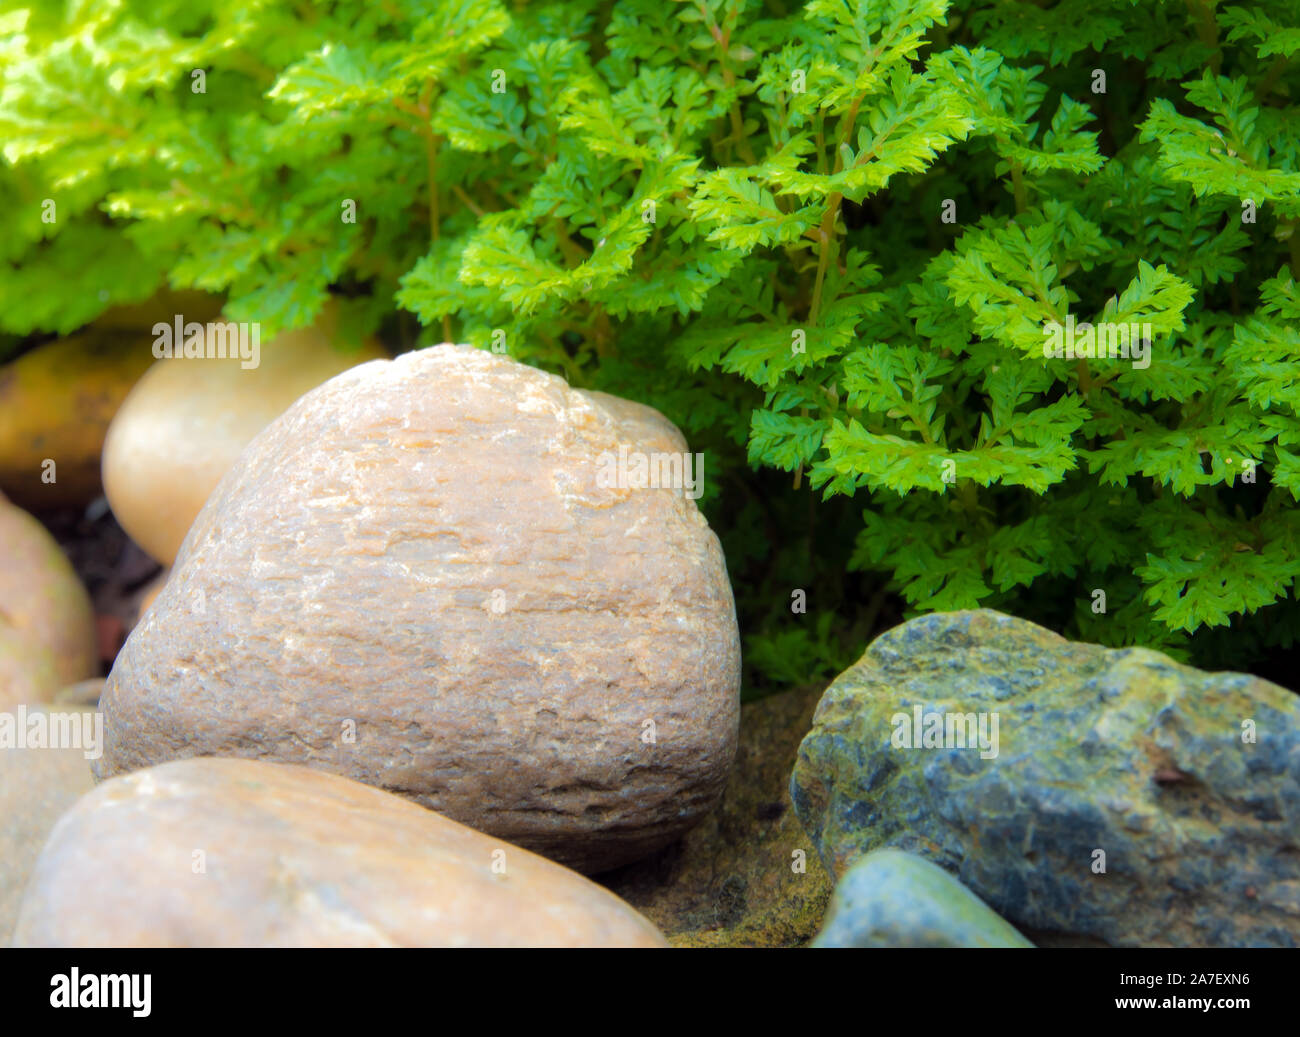 Freshness green and small leaf of Selaginella involvens fern on river rock Stock Photo